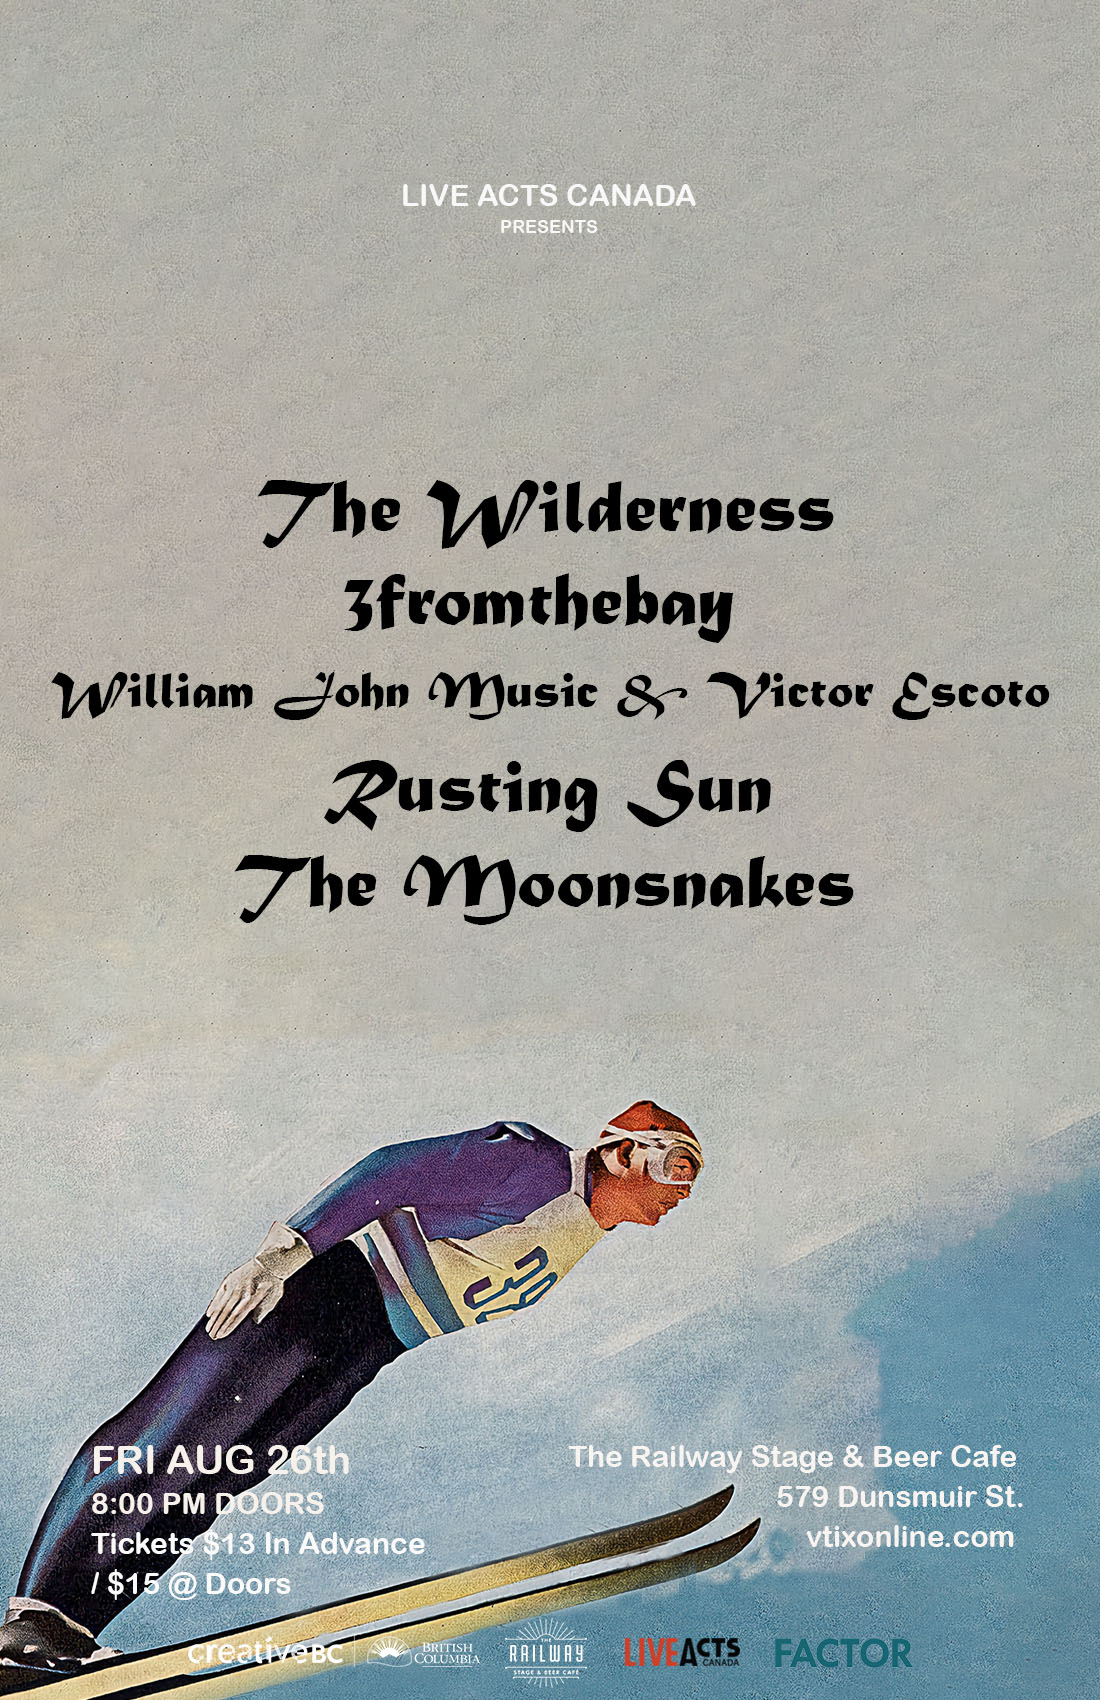 The Wilderness with Special Guests 3fromthebay, William John Music & Victor Escoto, Rusting Sun, The Moonsnakes